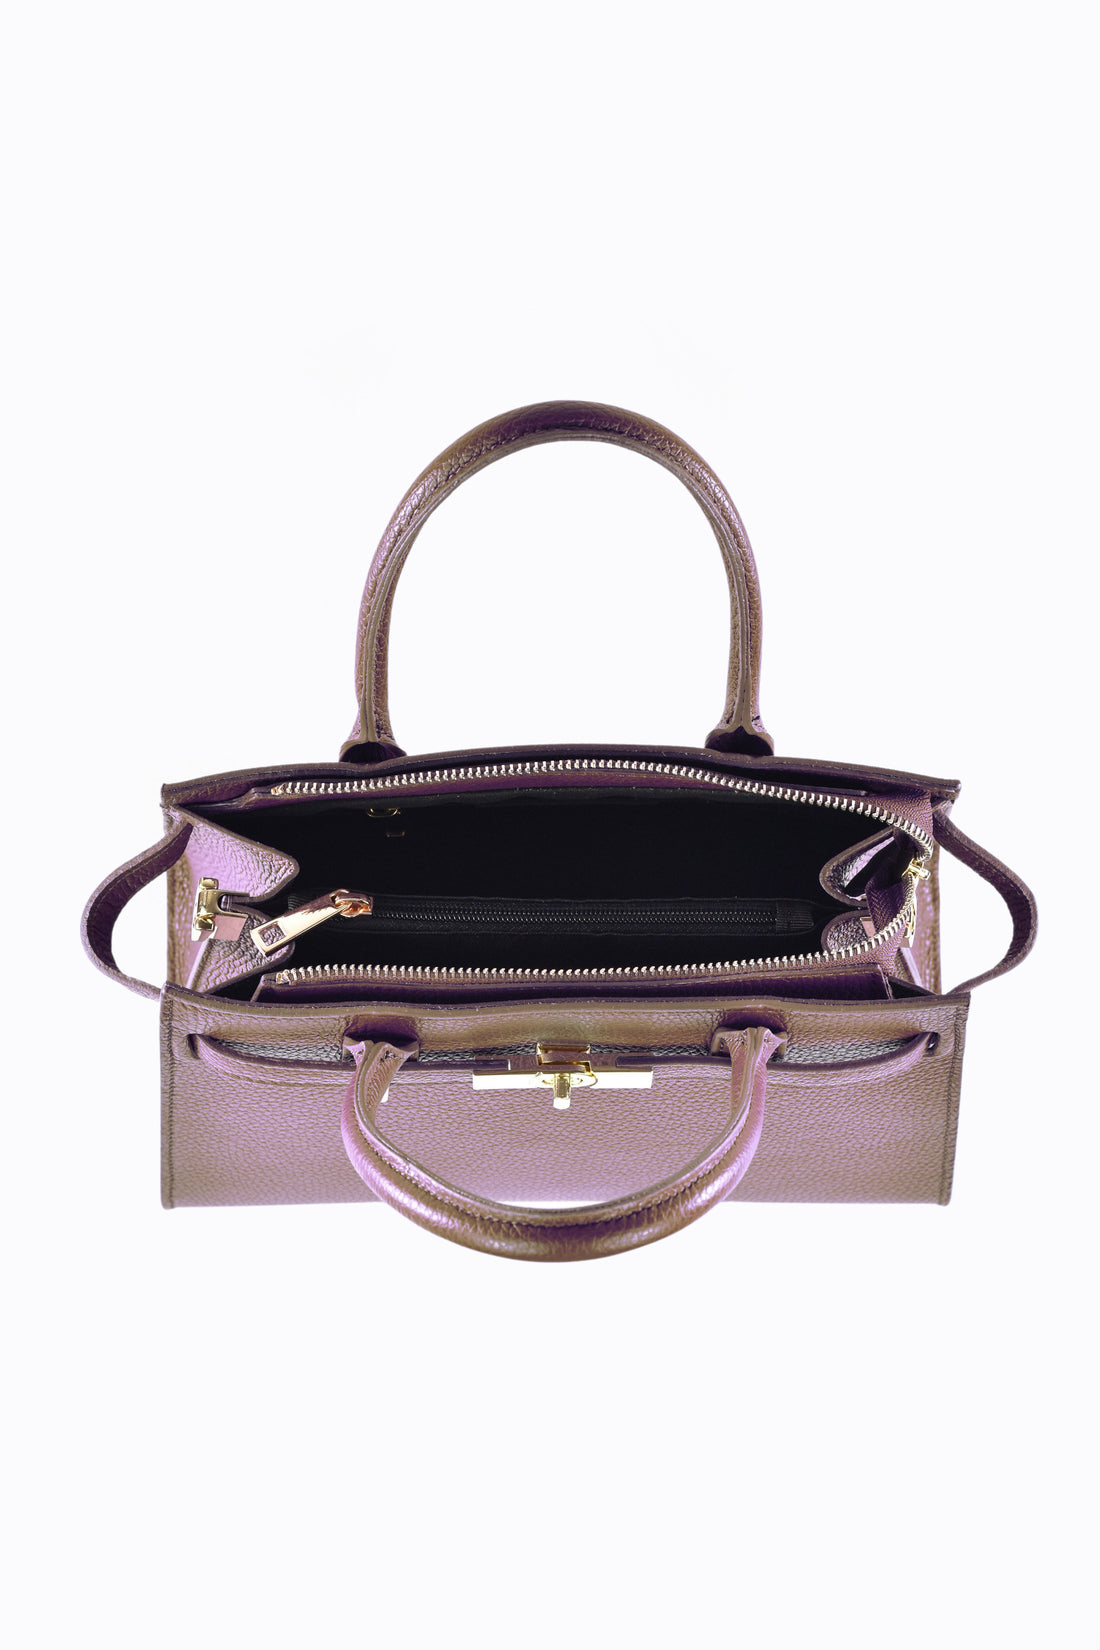 Grace bag in Dollaro Cuoio leather